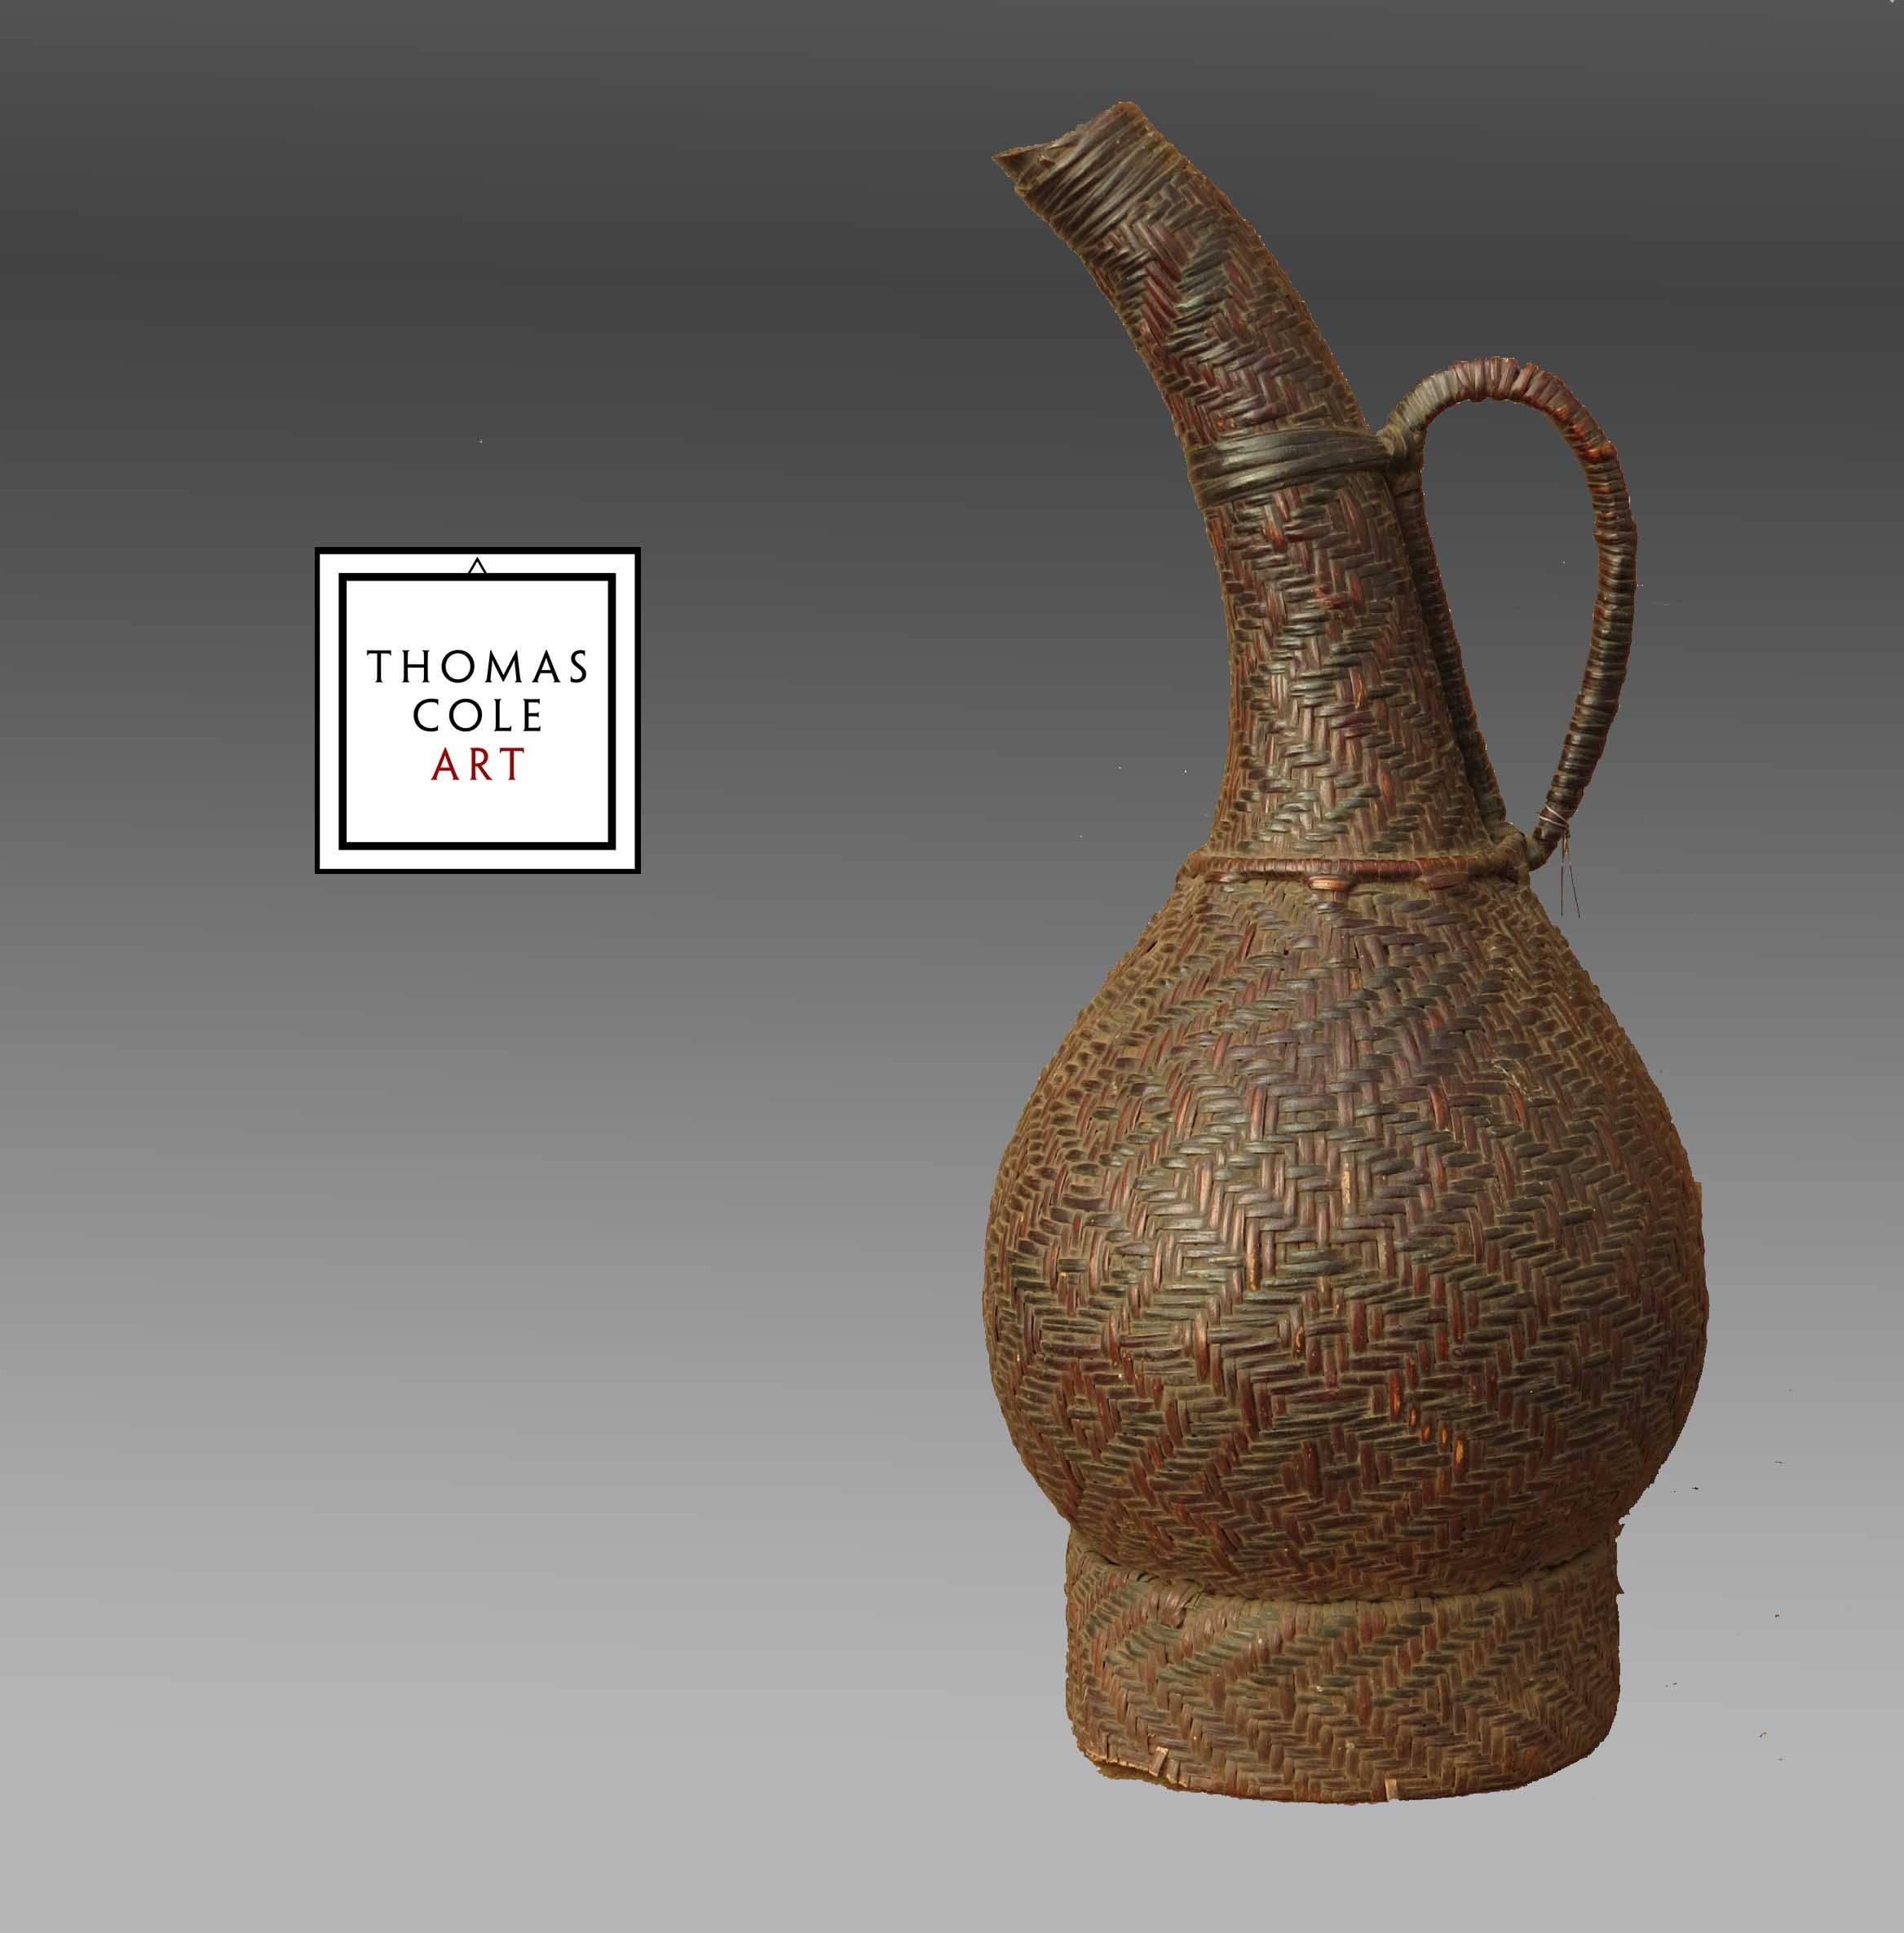 A gourd with woven basketry surrounding it, from the Kuba People of the Democratic Republic of the Congo. Measure: 11